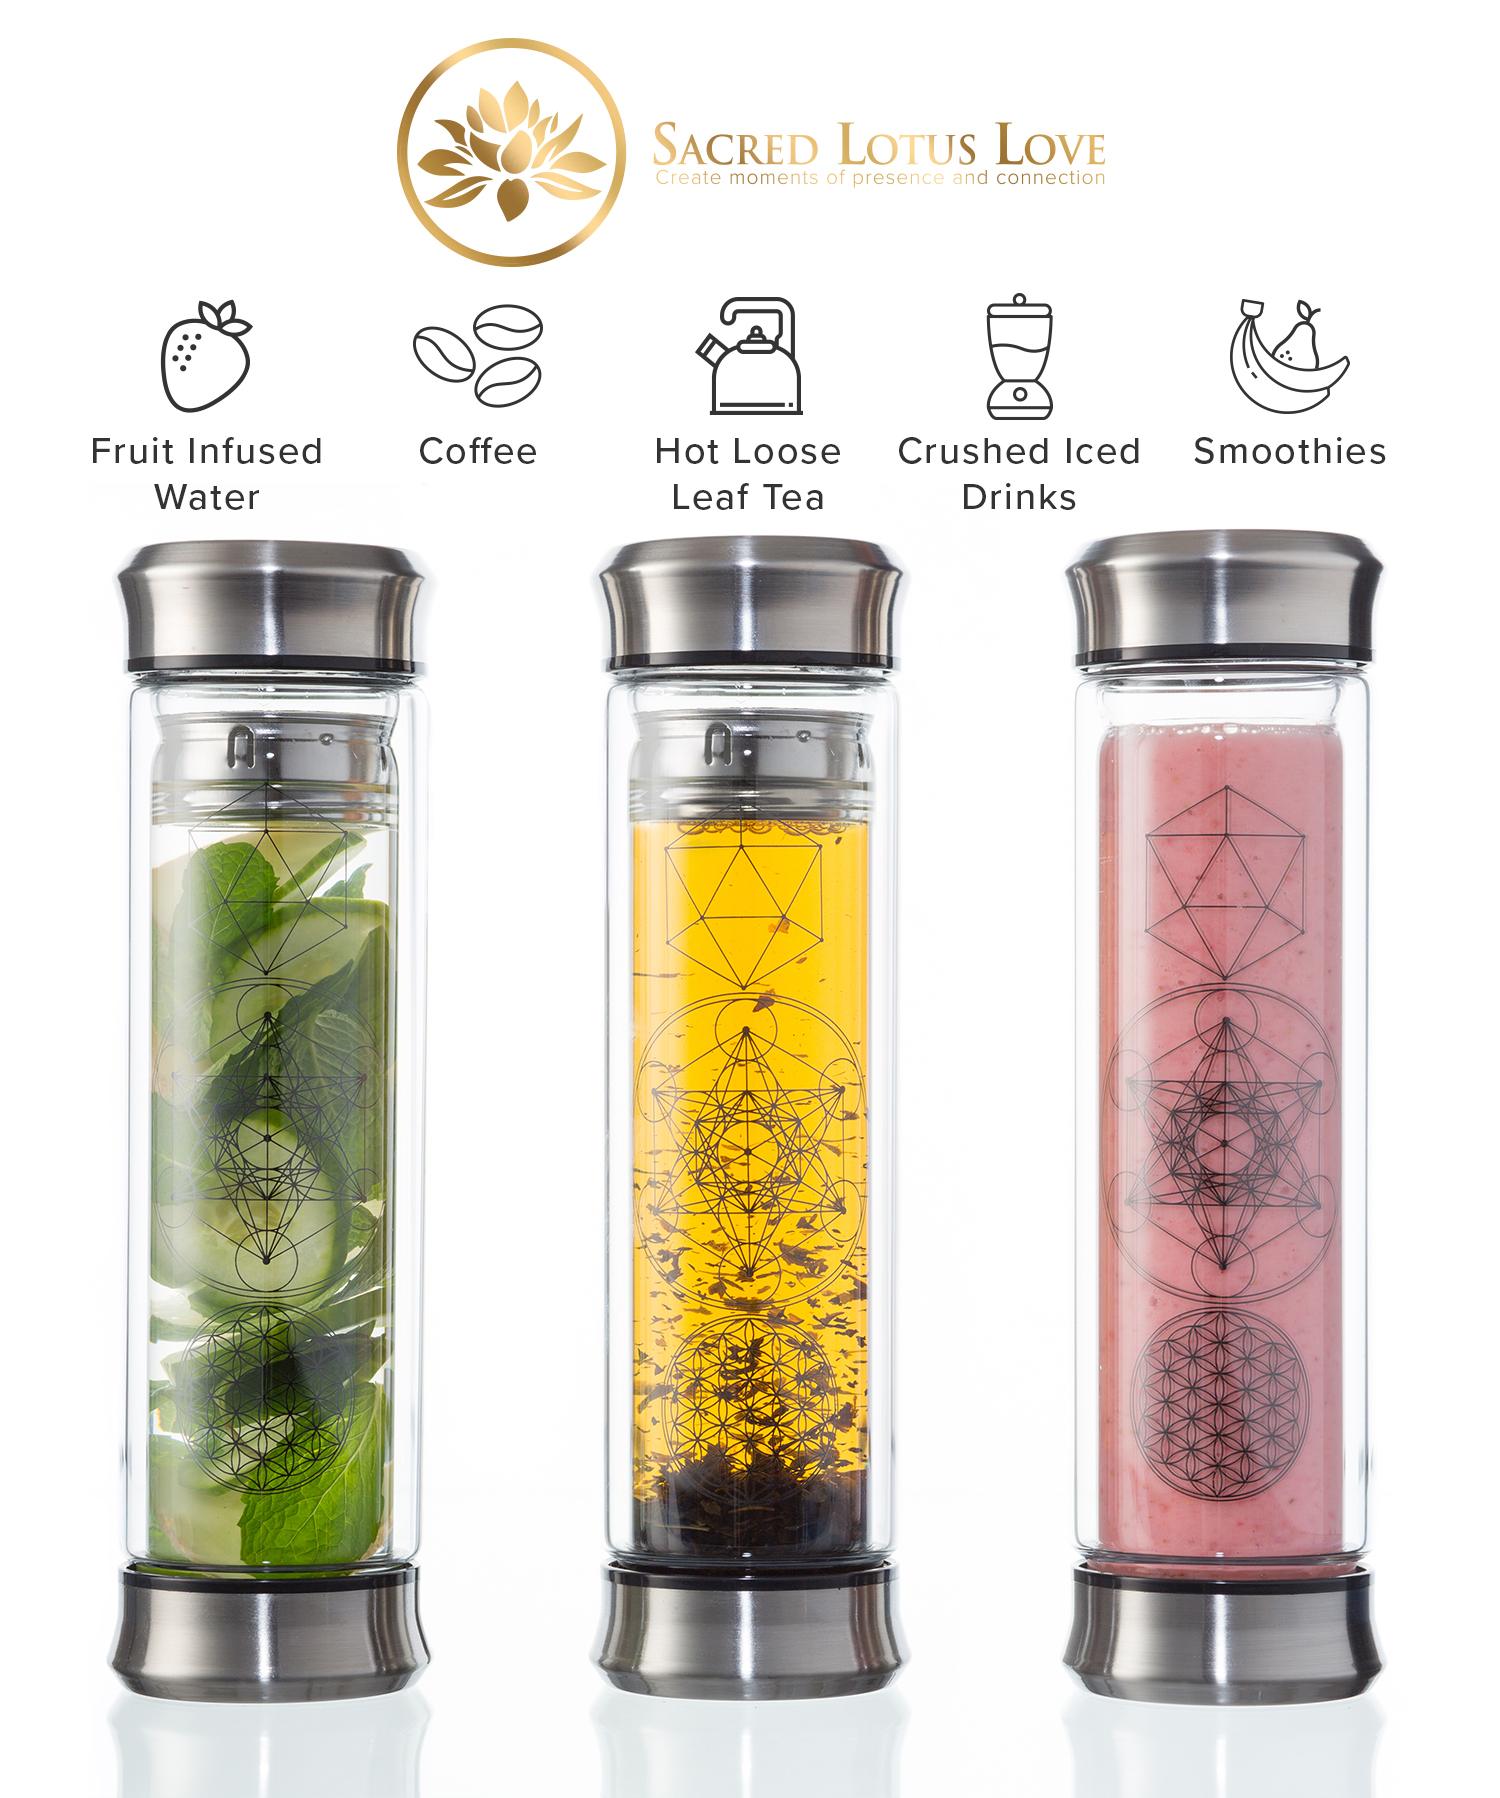 The Sacred Glass Tea Infuser Bottle + Strainer for Loose Leaf, Herbal, Green or Ice Tea. 415ml/14oz Cold Brew Coffee Mug + Fruit Infusions tumbler. Free Quilted and Neoprone Sleeves - image 4 of 11